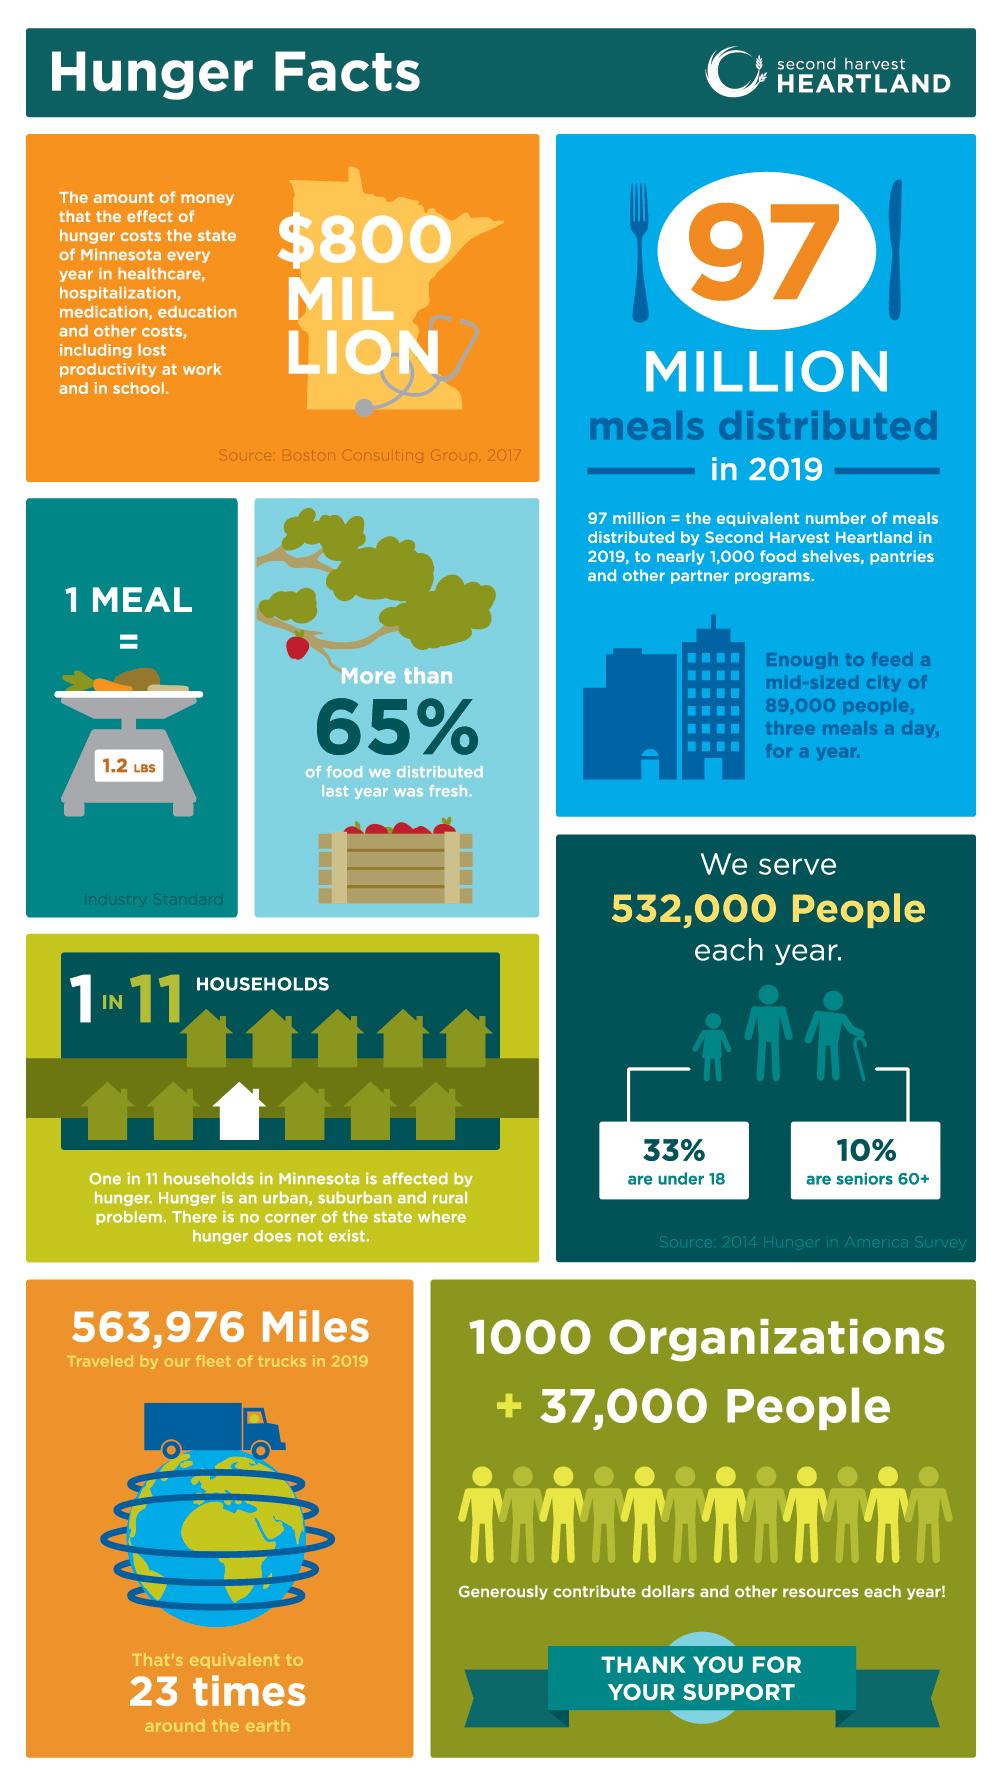 Hunger Facts by the numbers